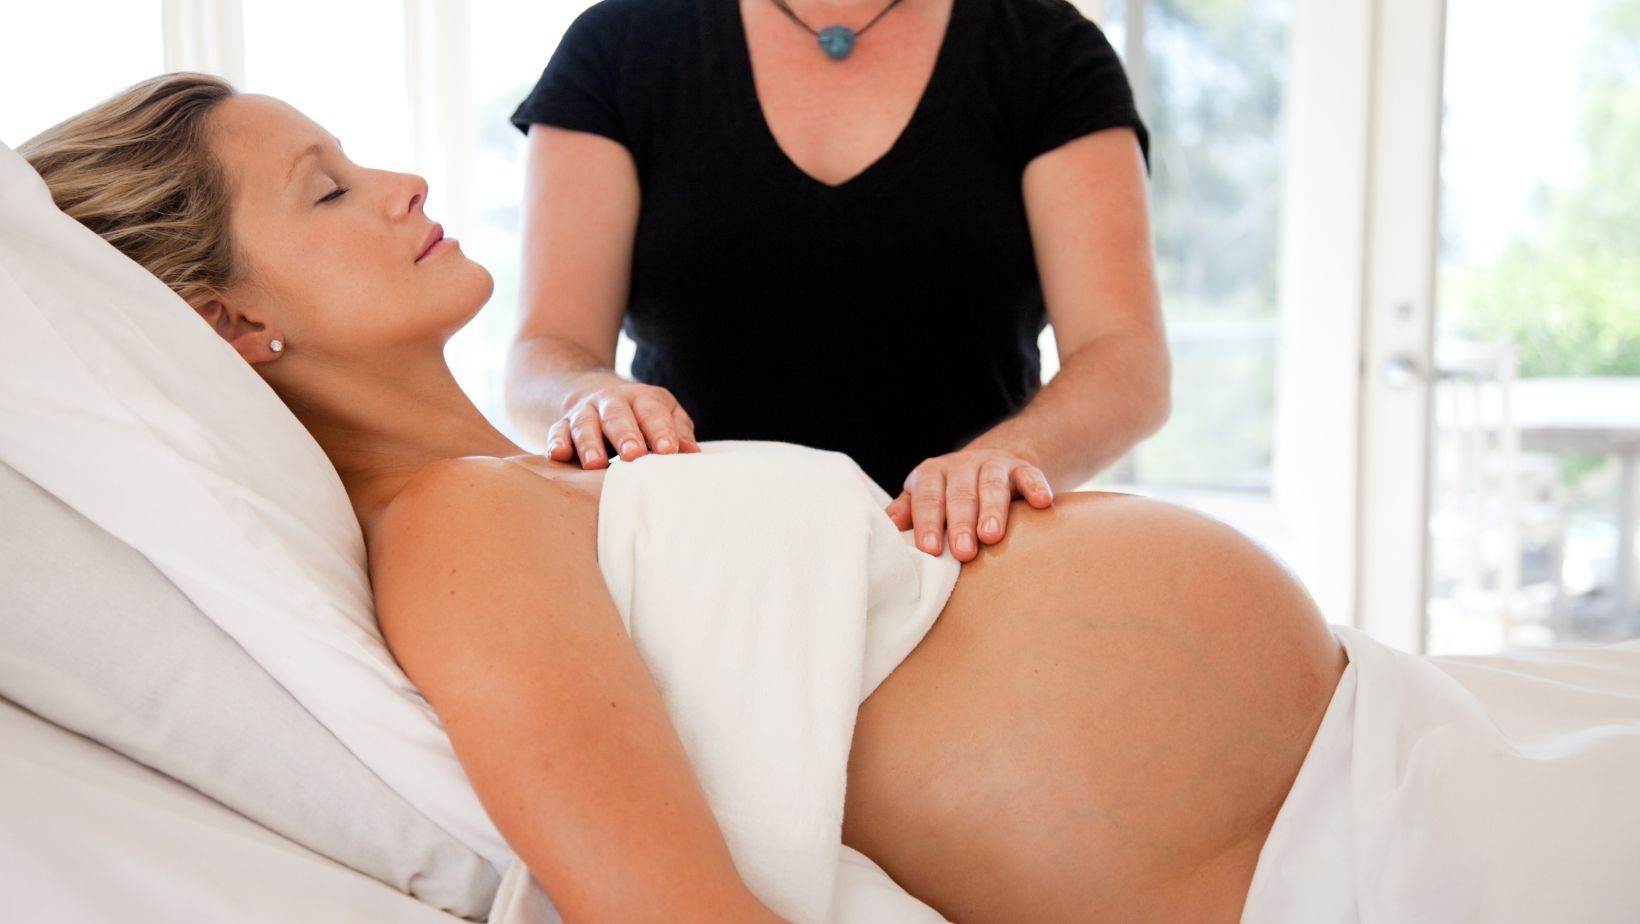 What Are The Benefits Of A Prenatal Massage?